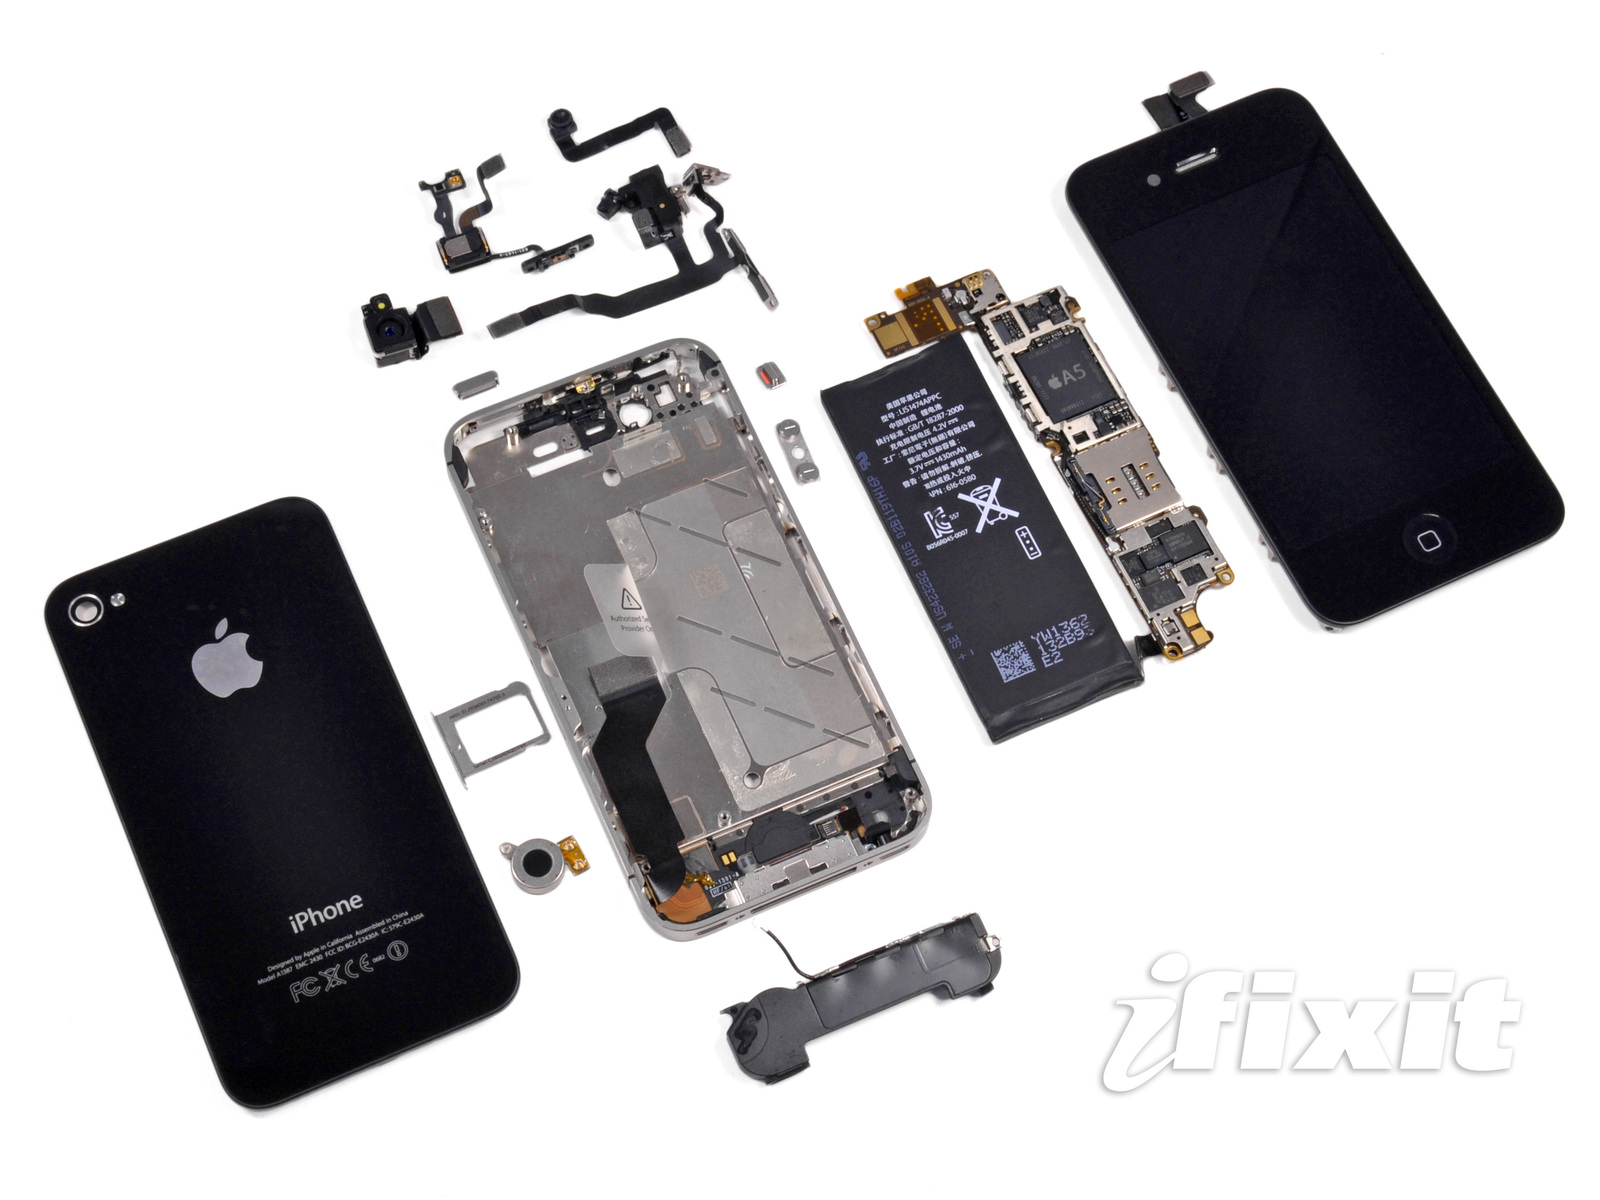 Iphone 4s Component Cost Is 1 Samsung Edged Out Slashgear